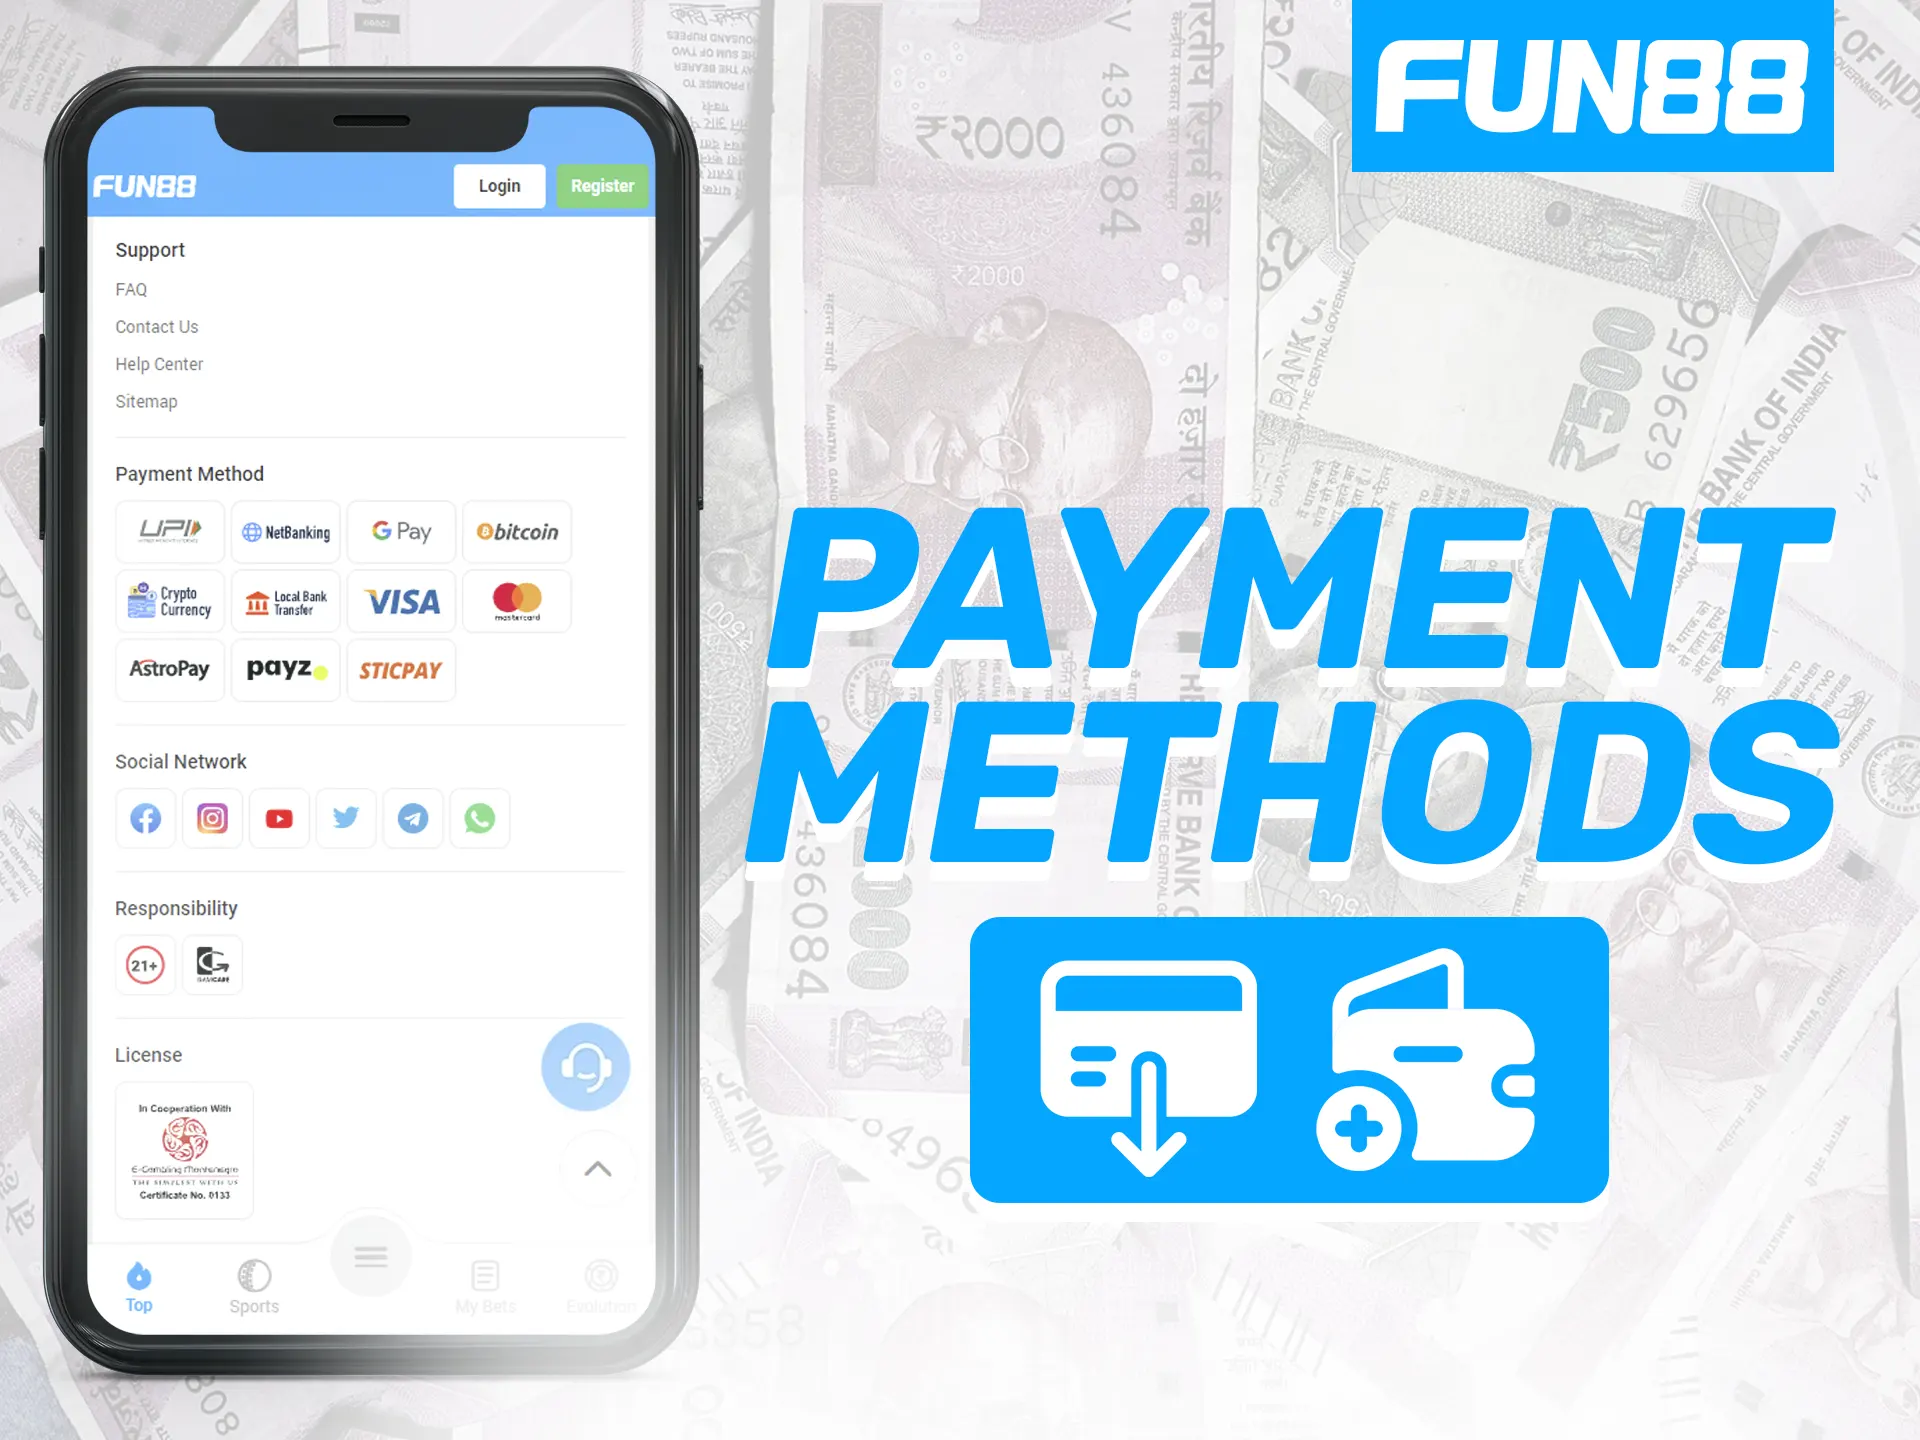 Fun88 app supports multiple payment methods, including Bank Transfer, GPay, Paytm, PhonePe, UPI, and Bitcoin.